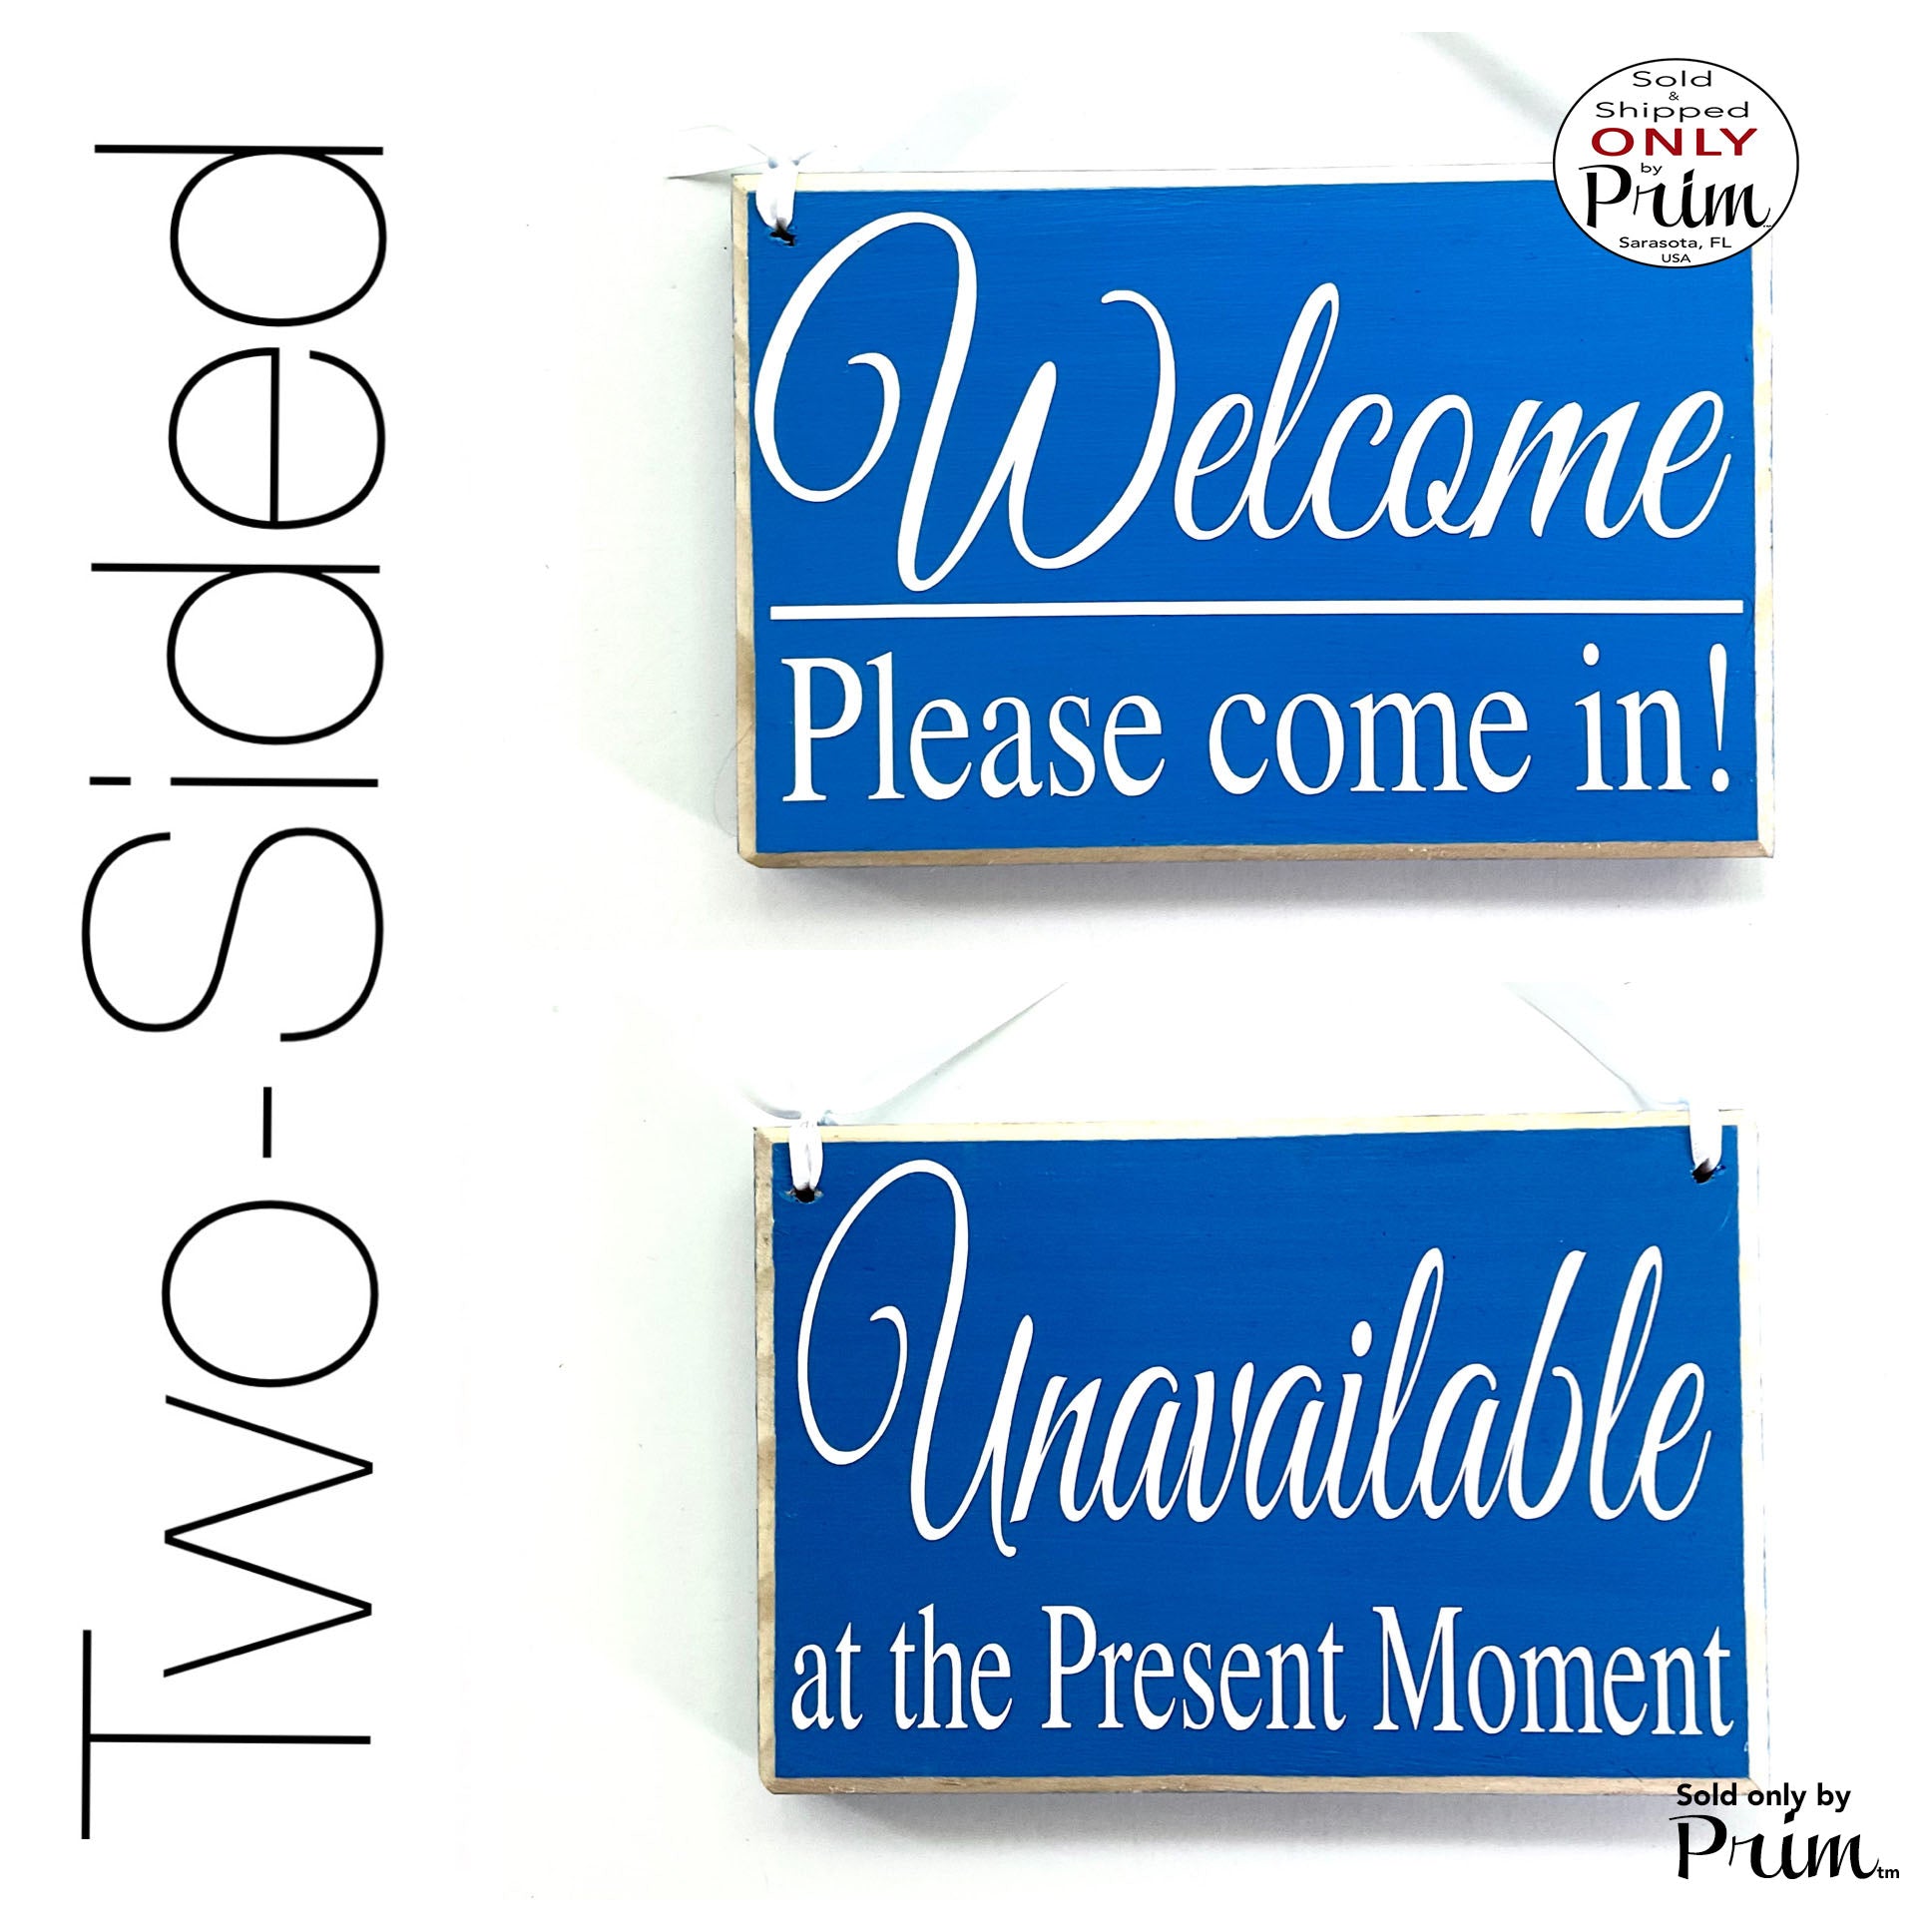 Two Sided 8x6 Welcome Please Come On In Unavailable at the Present Moment Custom Wood Sign Please Do Not Disturb Meeting Office Door Hanger Designs by Prim